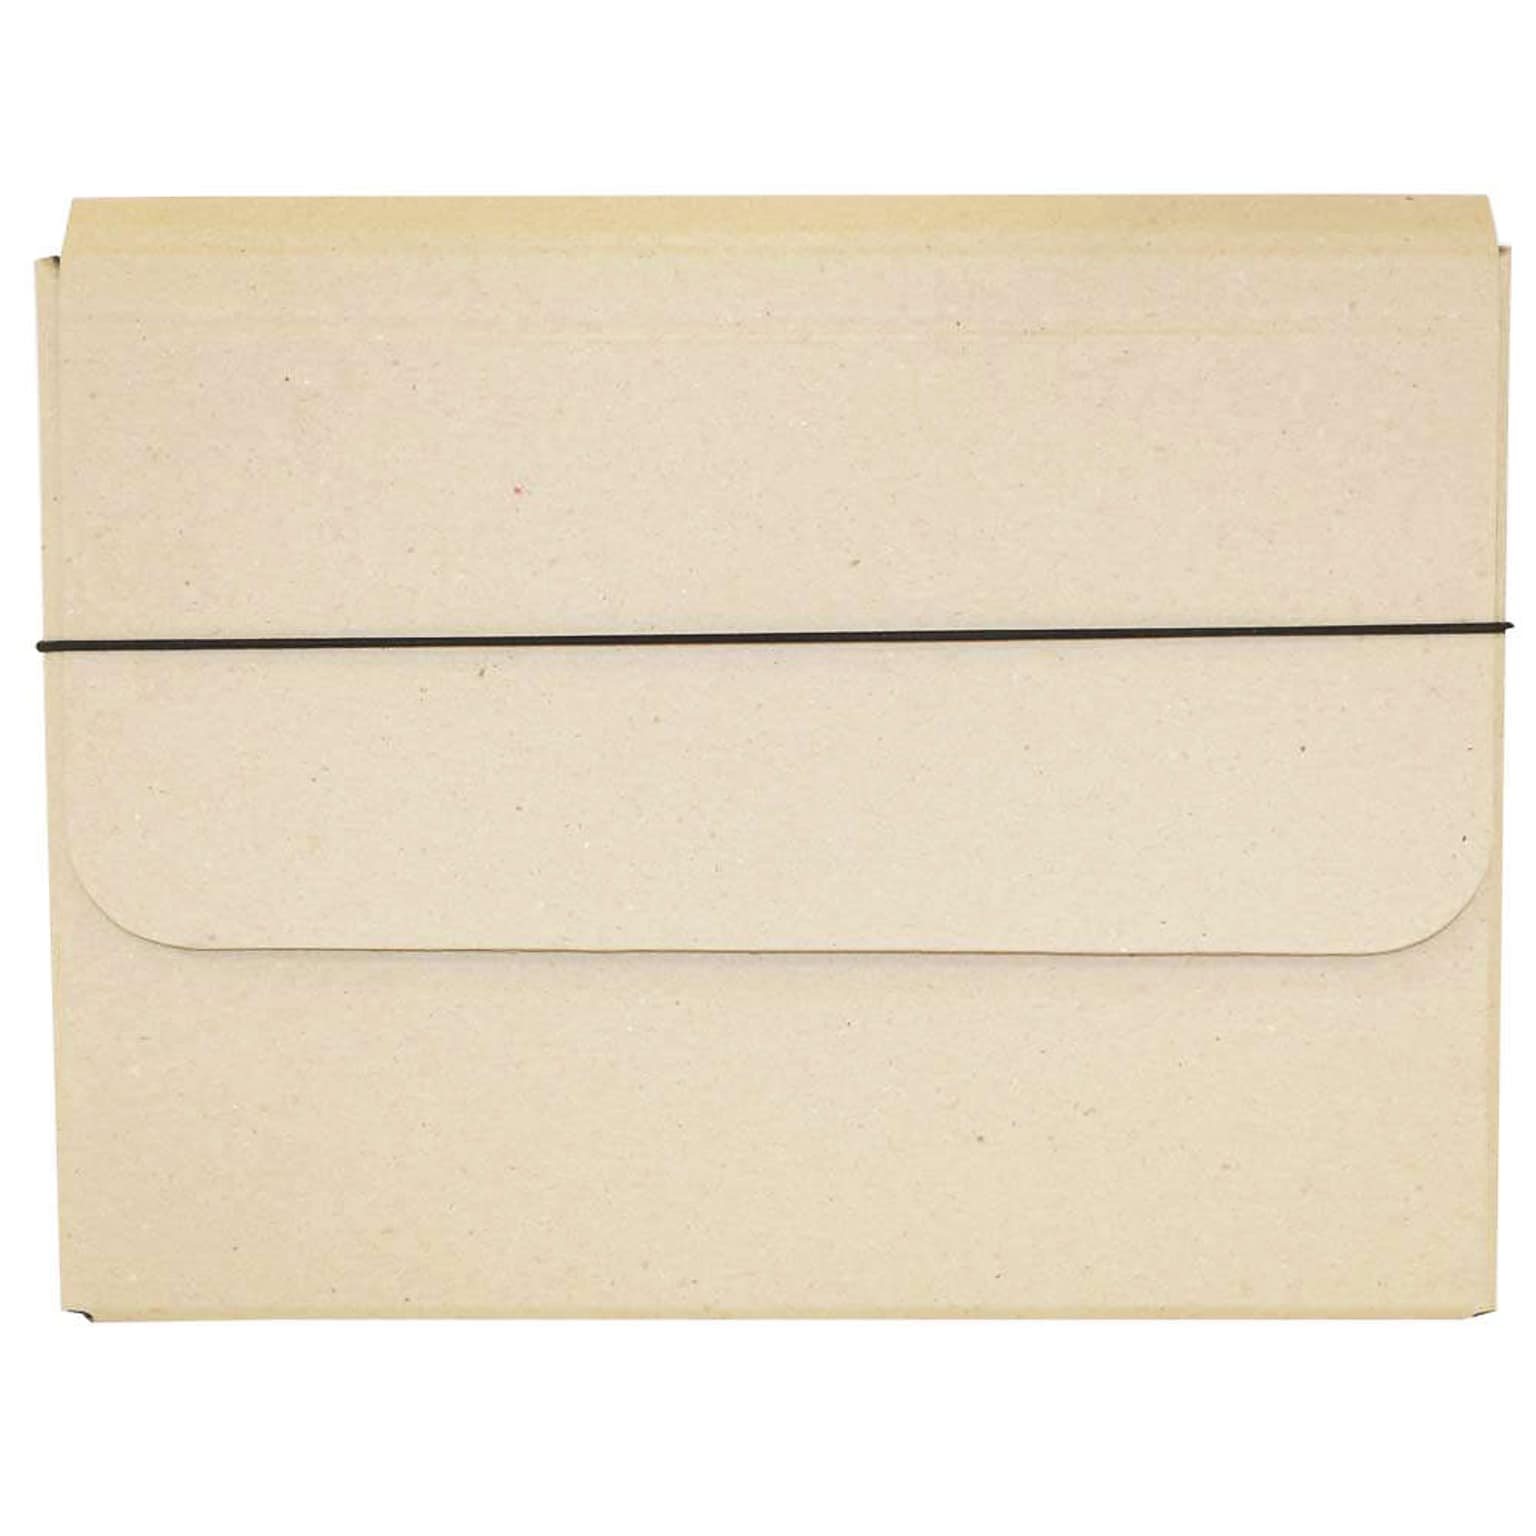 JAM Paper Thick Portfolio File Carrying Case with Elastic, 10 x 1 1/4 x 13 1/4, Natural Kraft, Sold Individually (154528517)